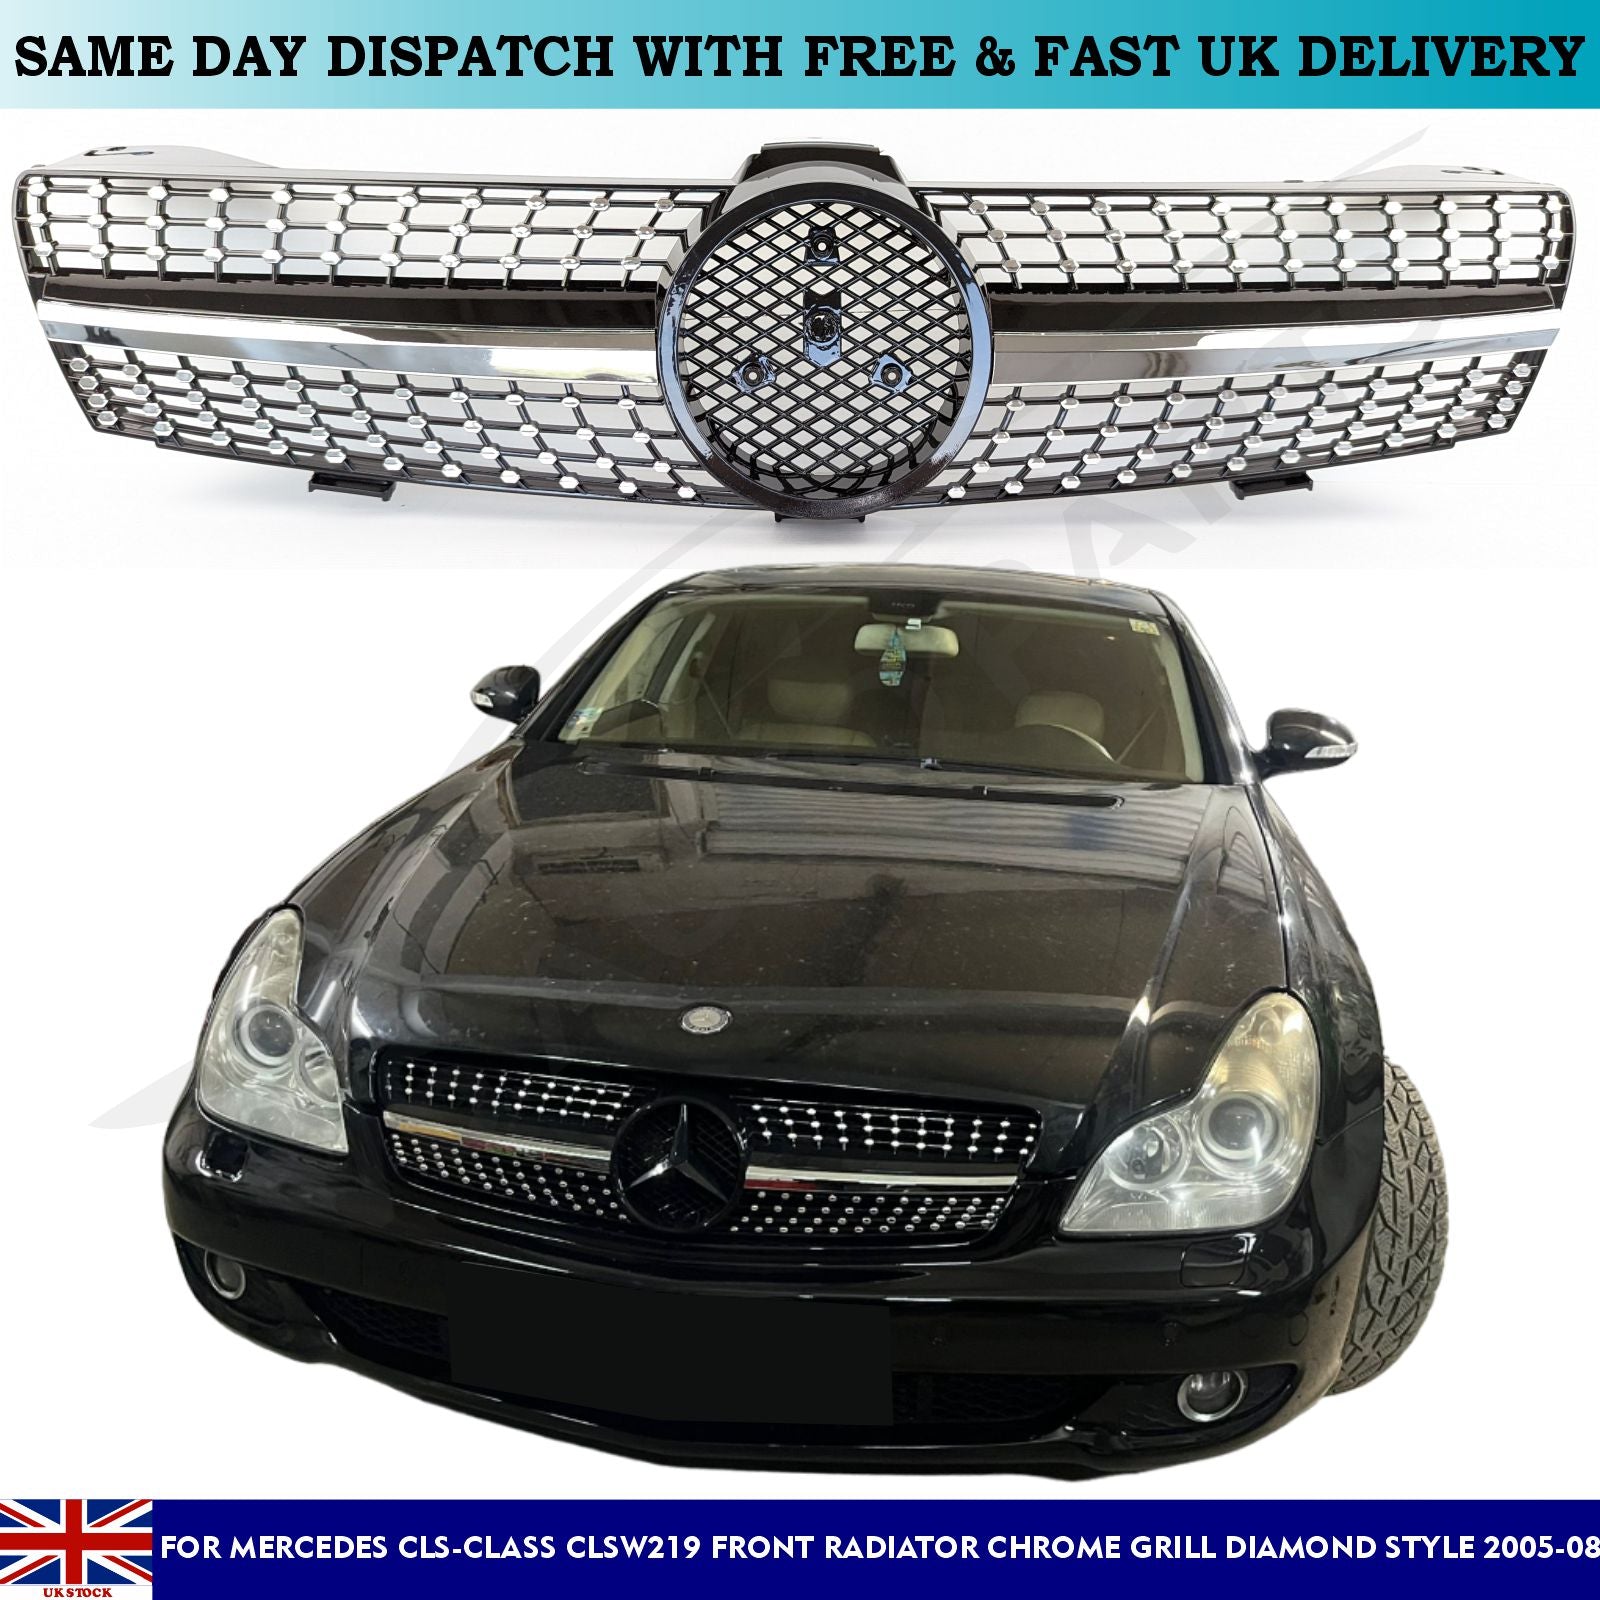 For Mercedes CLS-Class CLSW219 Front Radiator chrome Grill Diamond Style 2005-08